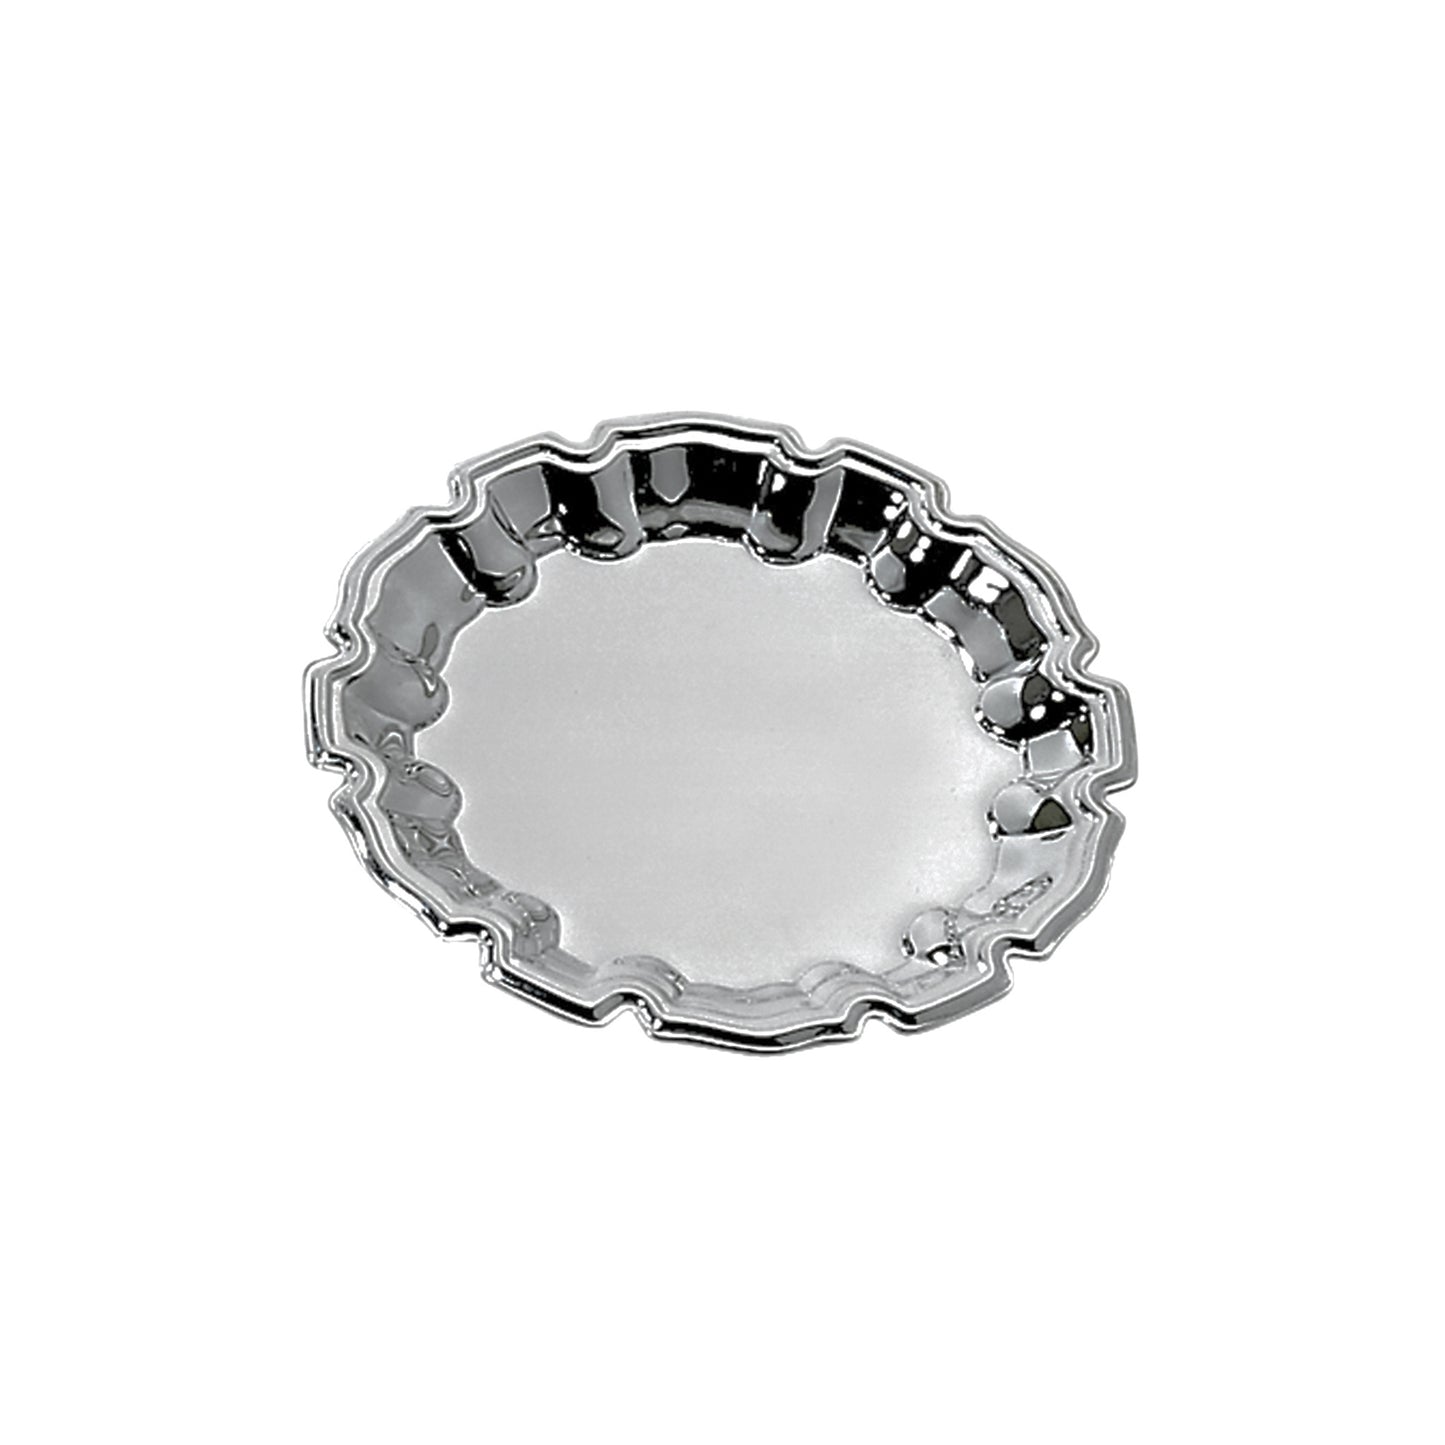 Chippendale Style Tray - 5"